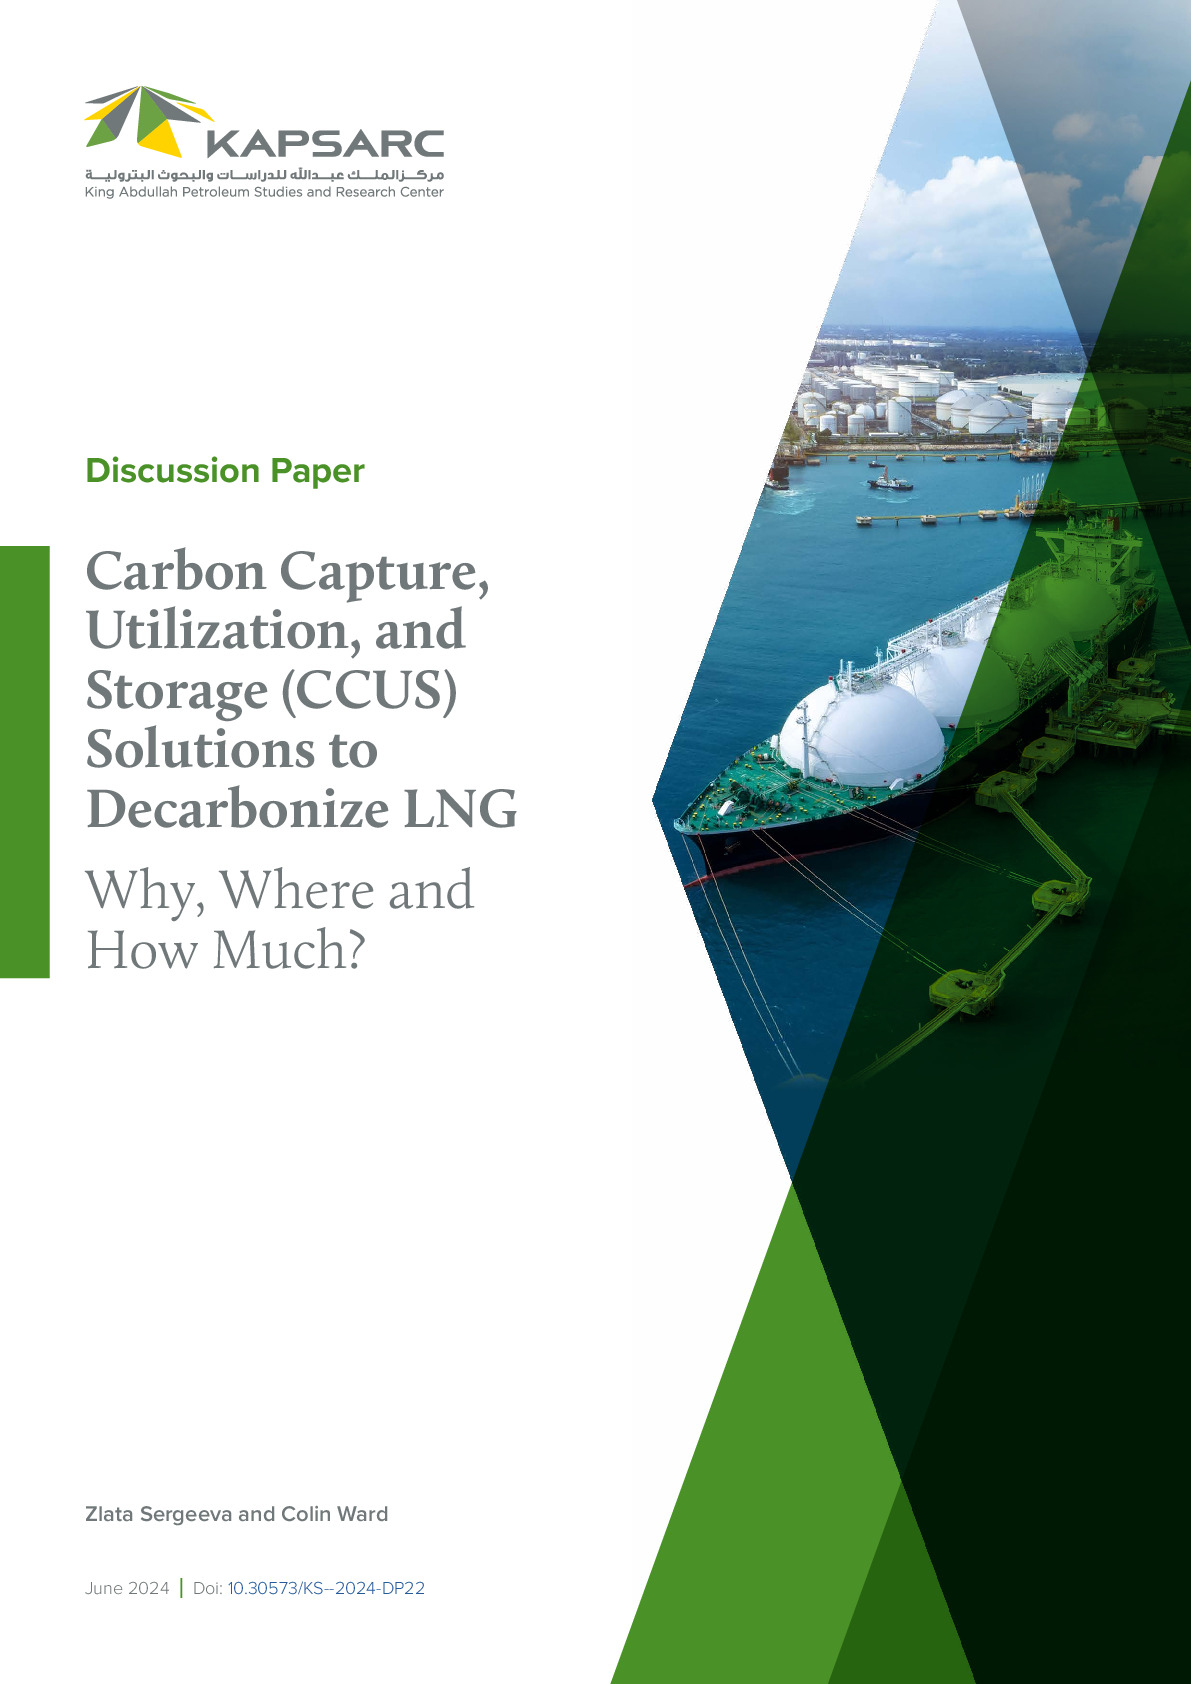 Carbon Capture, Utilization, and Storage (CCUS) Solutions to Decarbonize LNG: Why, Where and How Much?